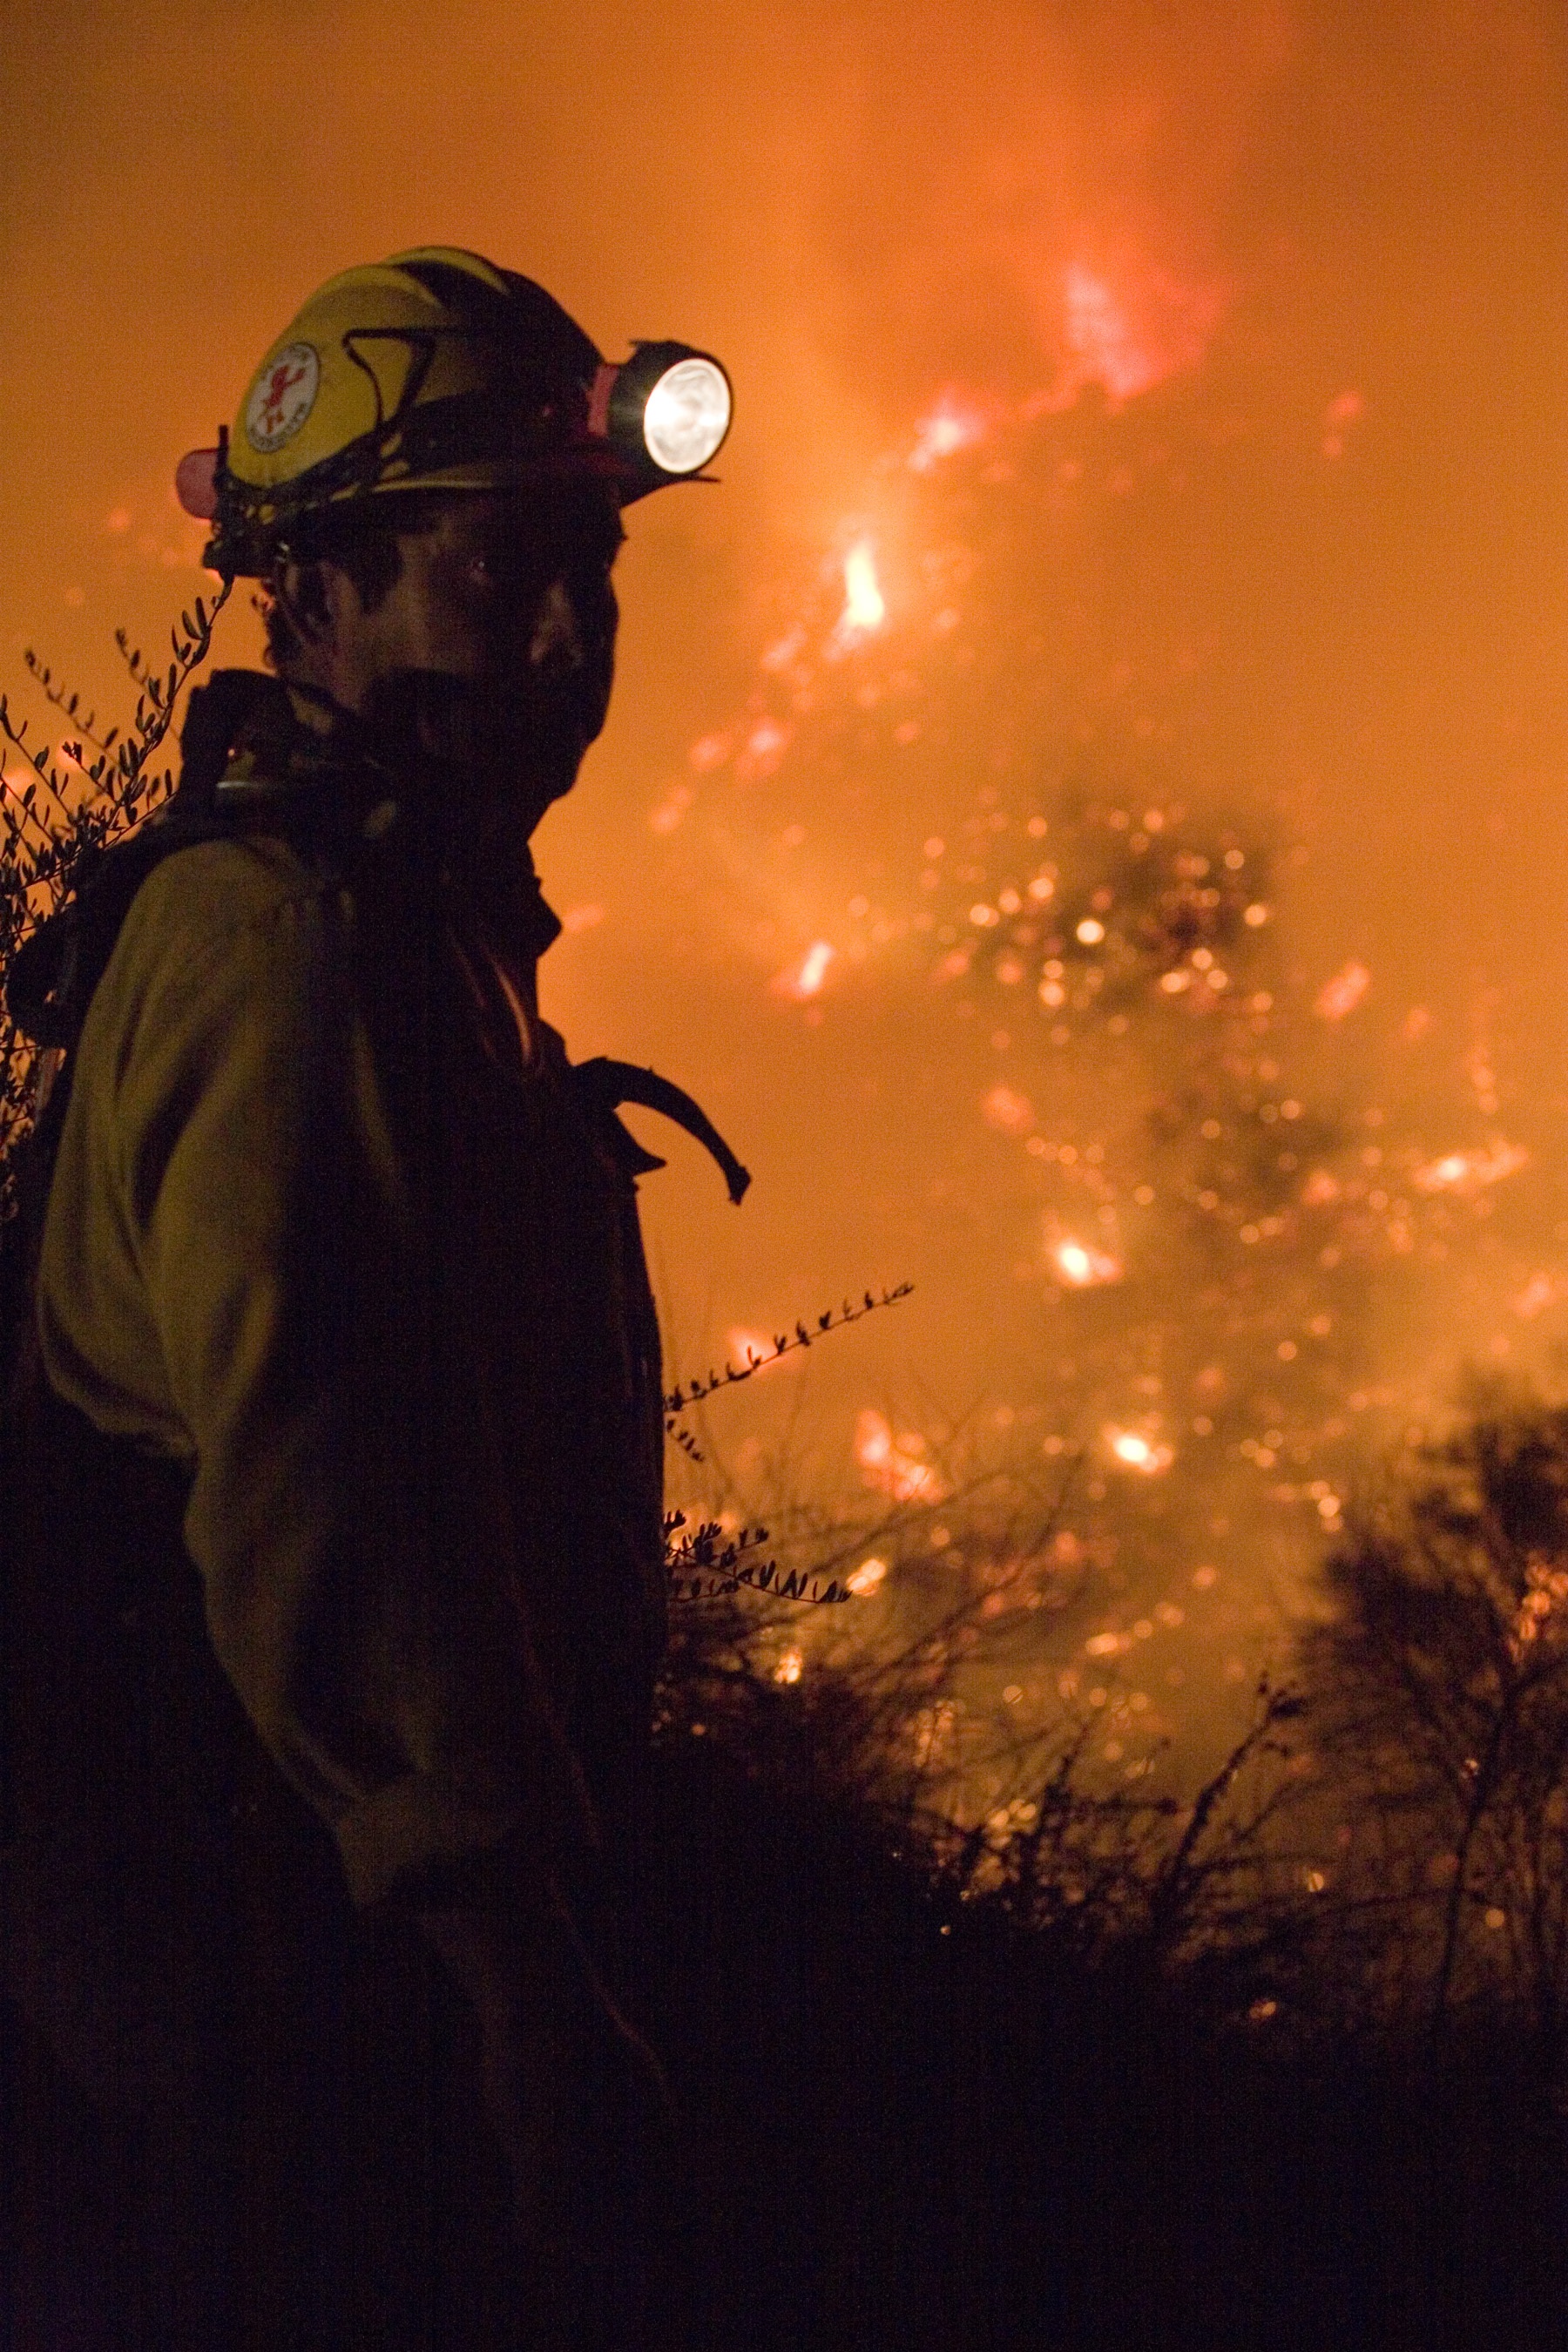 Firefighters on work photo